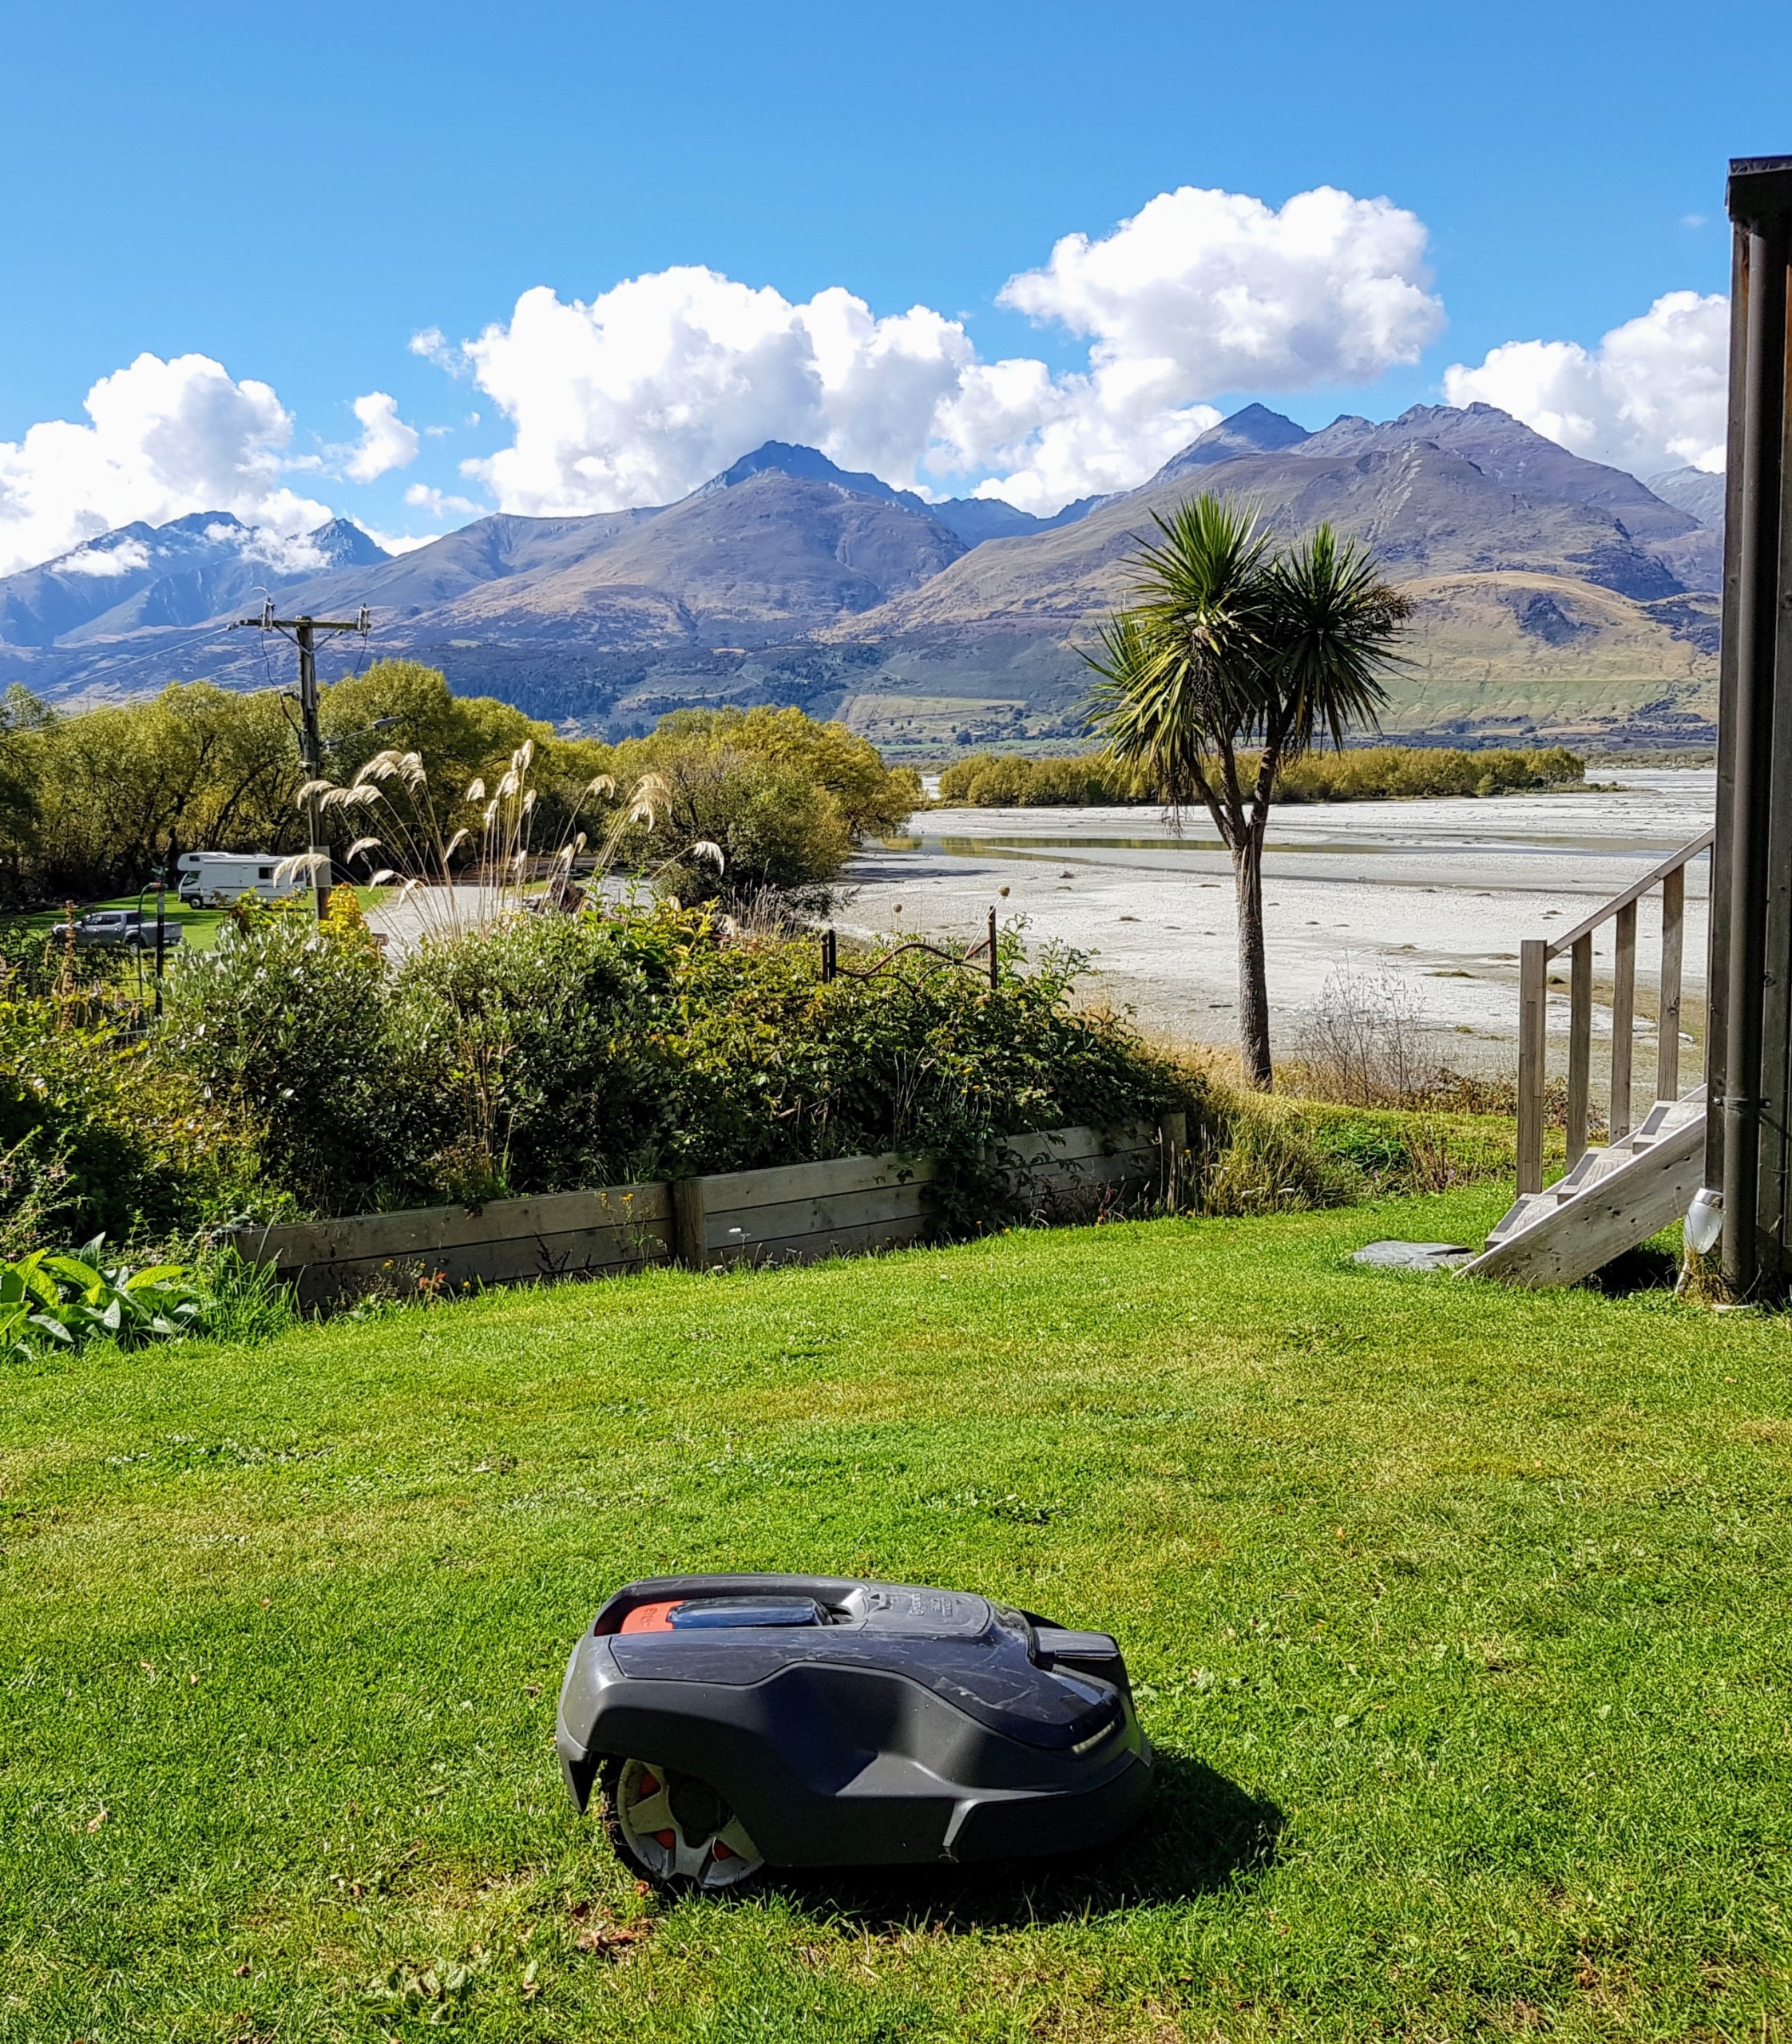 Robot lawn mower at EcoScapes with Glenorchy mountains